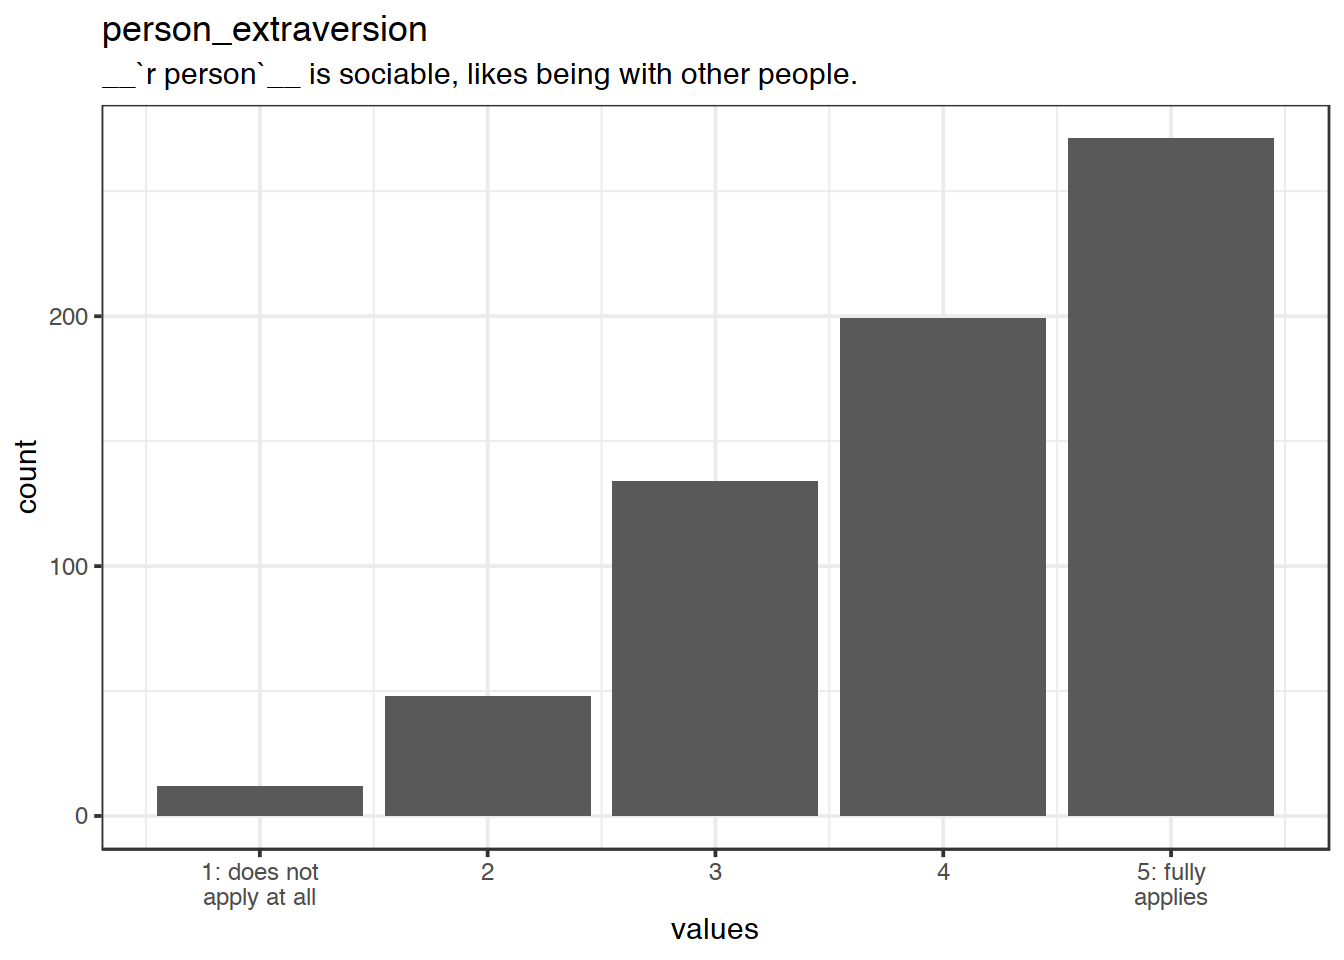 Distribution of values for person_extraversion